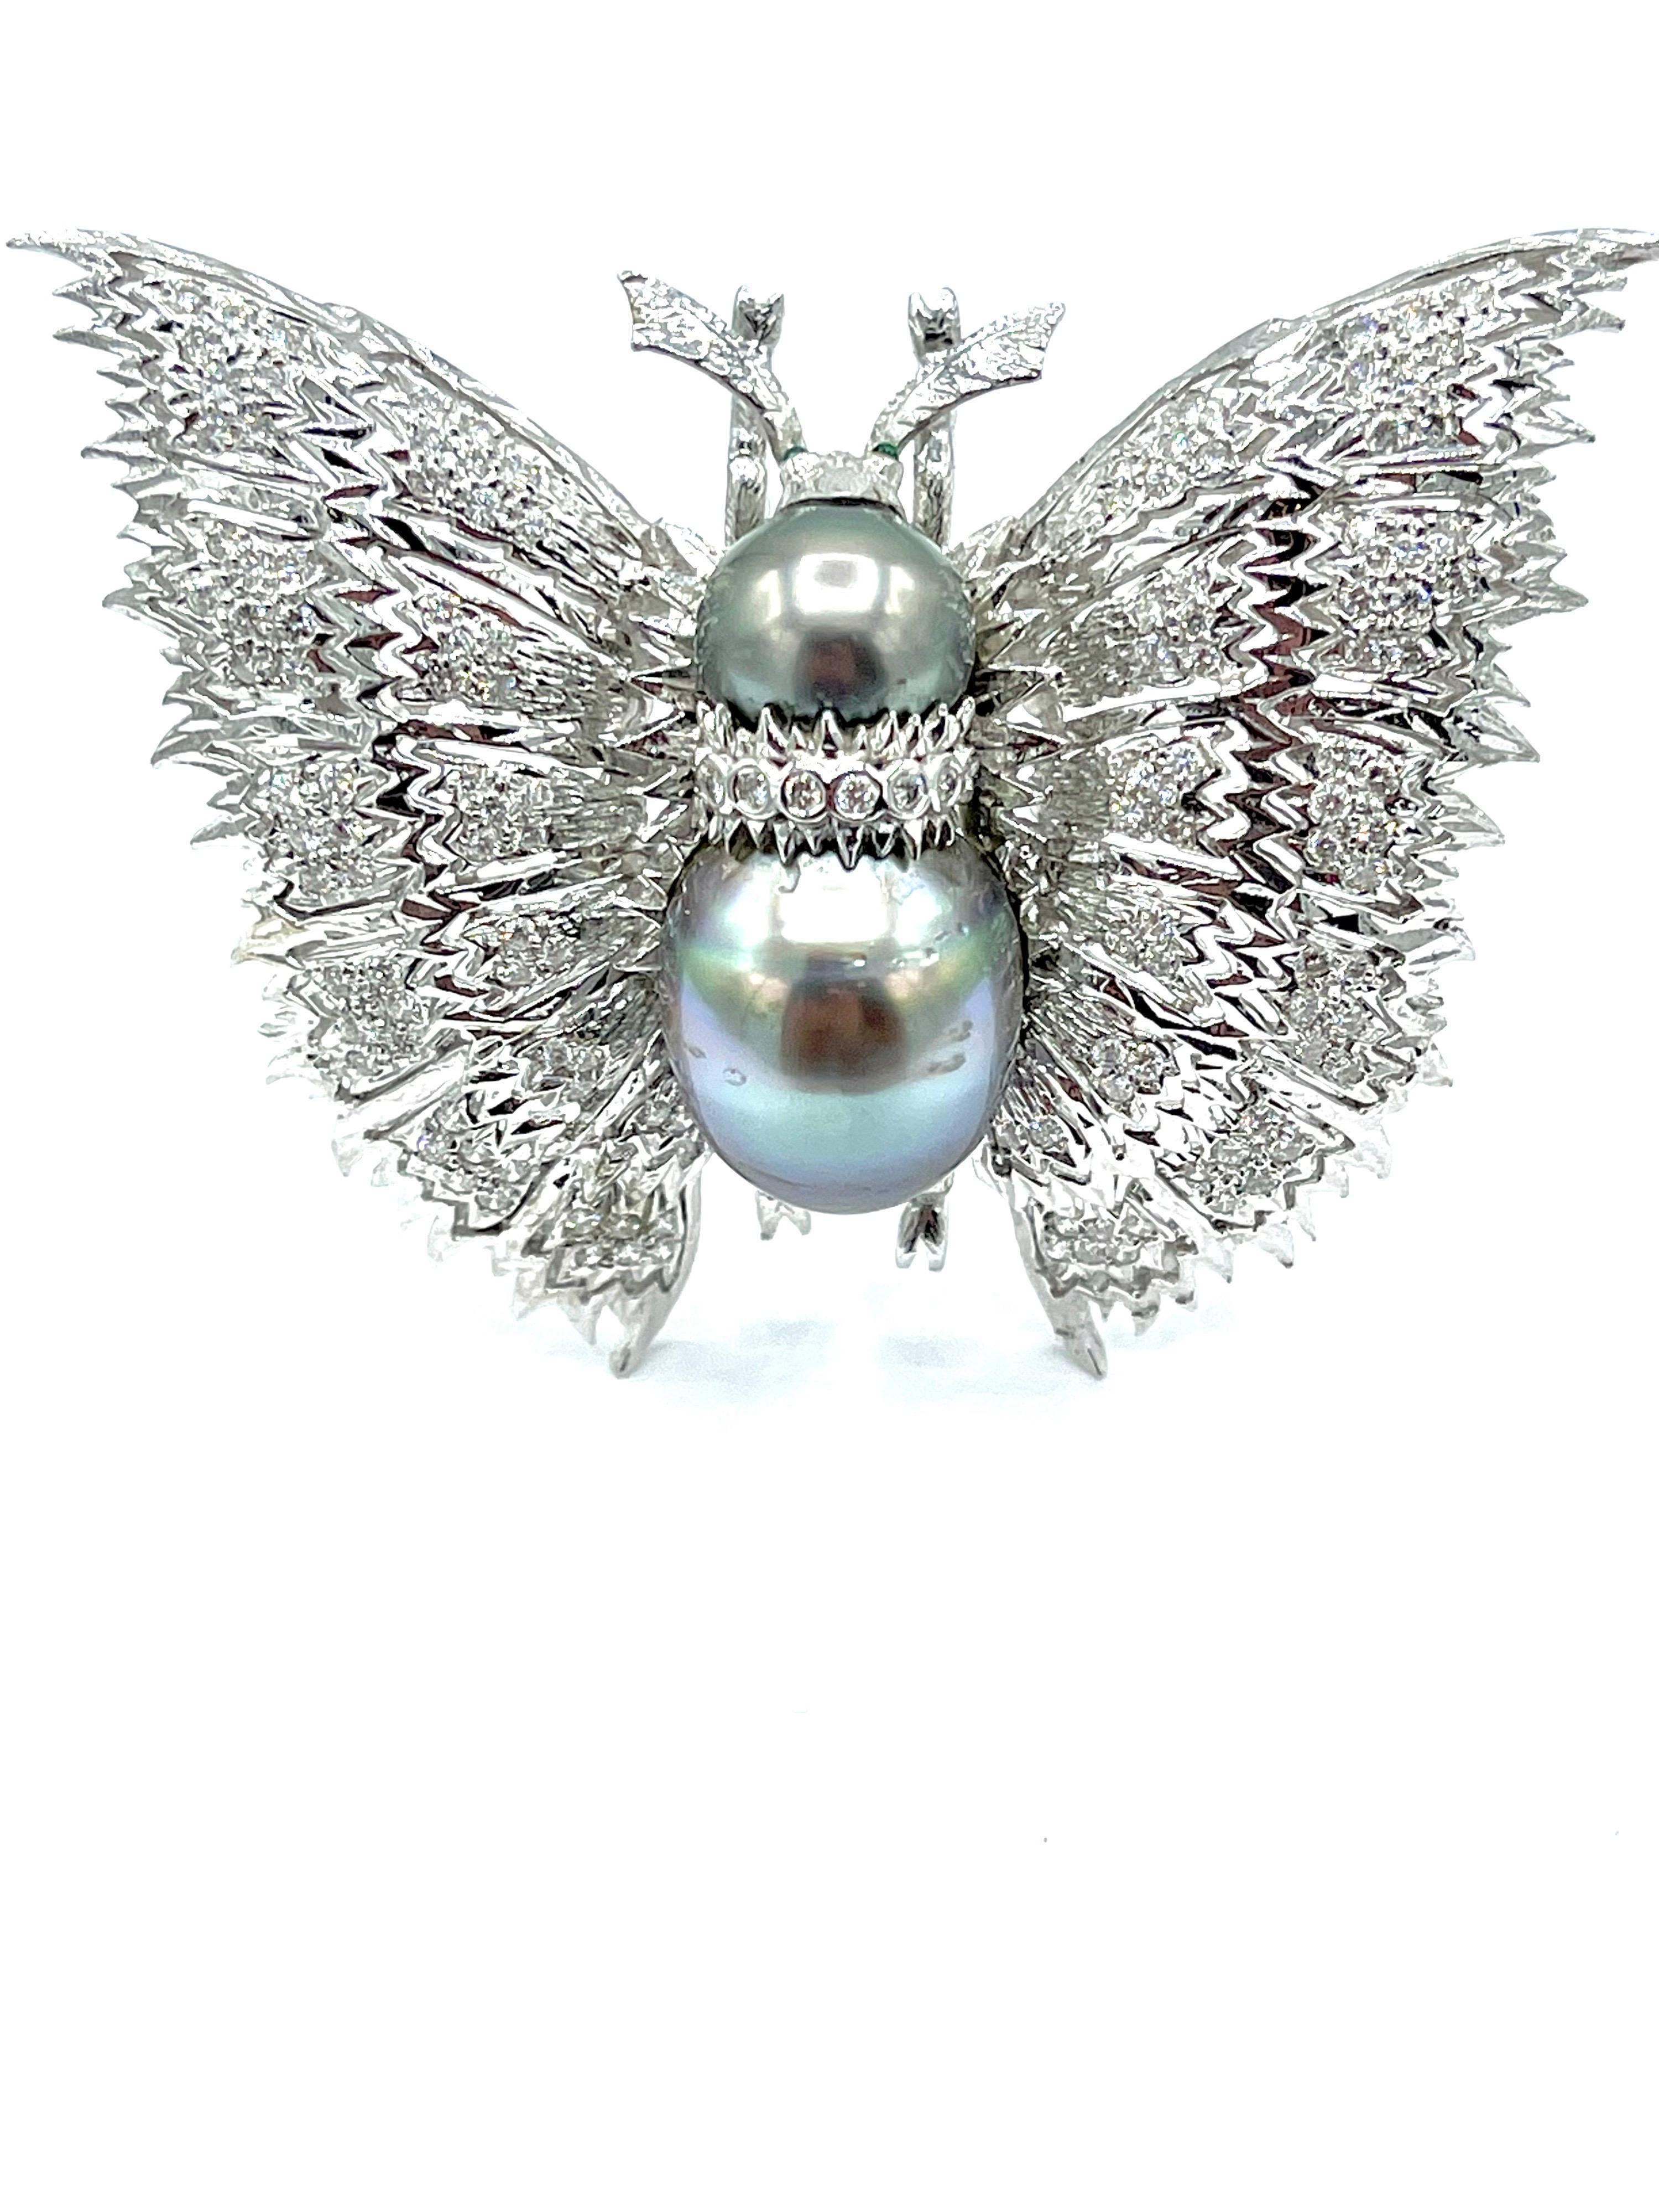 A wonderfully handcrafted butterfly brooch!  The butterfly wings are set with round brilliant Diamonds in 18K white gold, weighing 2.01 carats total, and the body consists of two Tahitian Pearls of 11.20mm and 18.00mm.  The back side of the